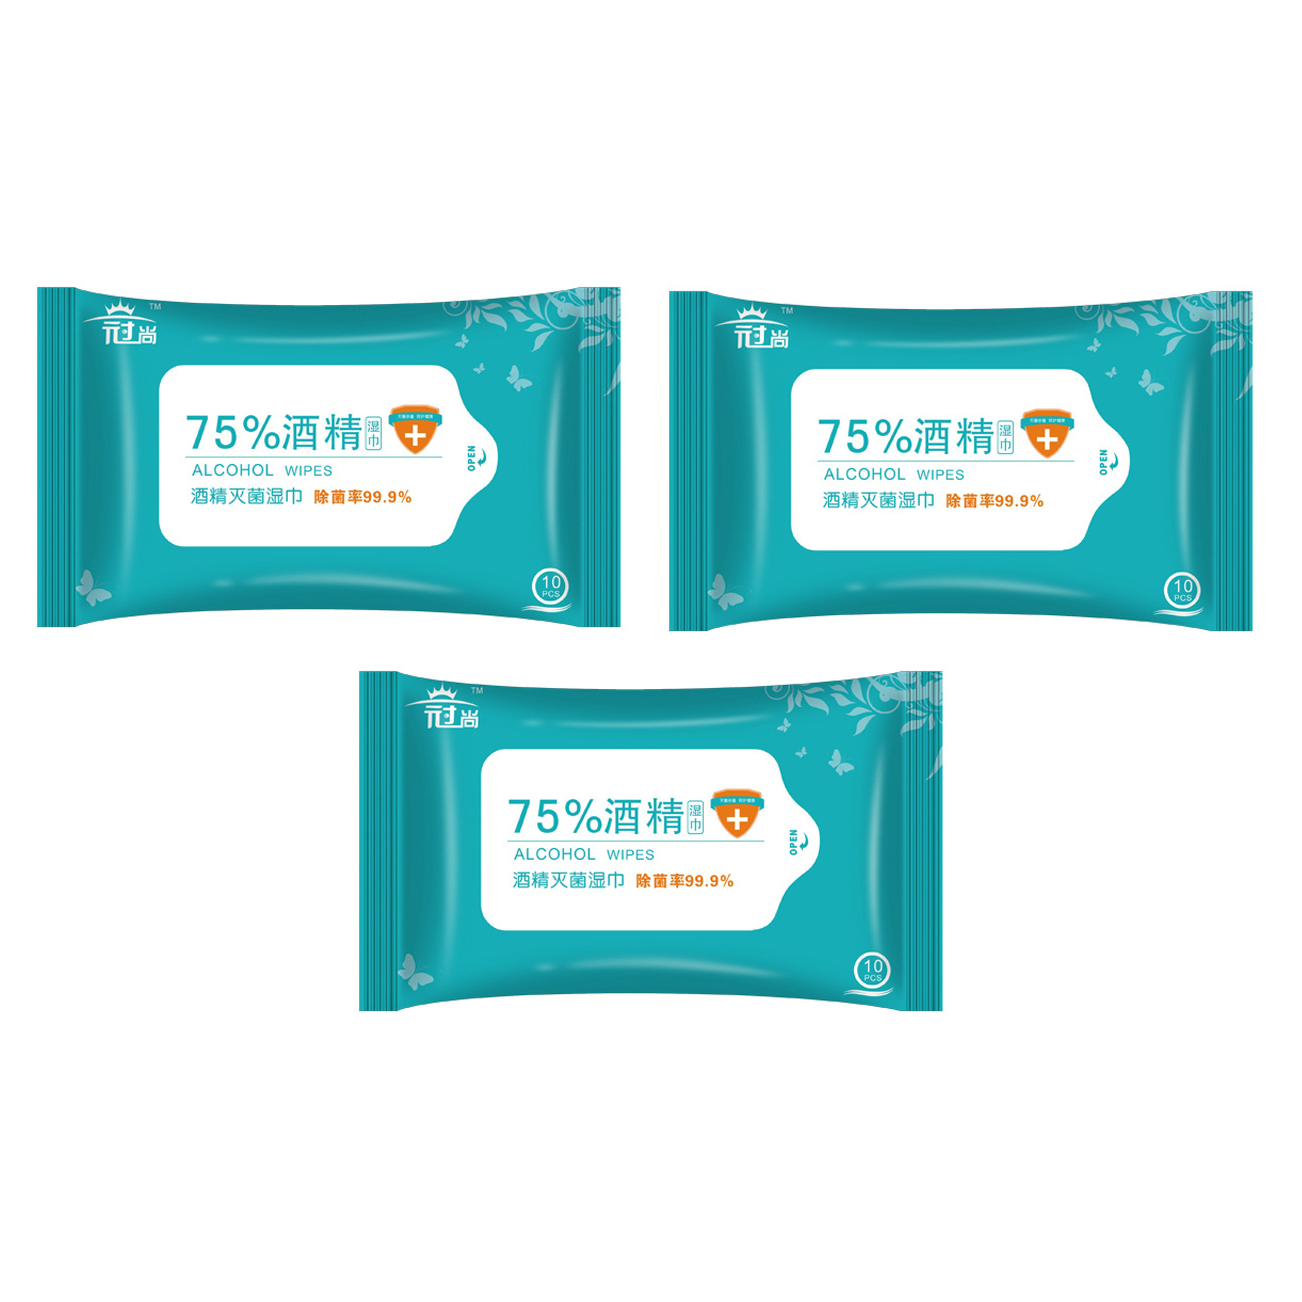 SHANGTAITAI 3 Packs of 10 Pcs 75% Medical Alcohol Wipes 99.9% Antibacterial Disinfection Cleaning Wet Wipes Disposable Wipes for Cleaning and Sterilization in Office Home School Swab